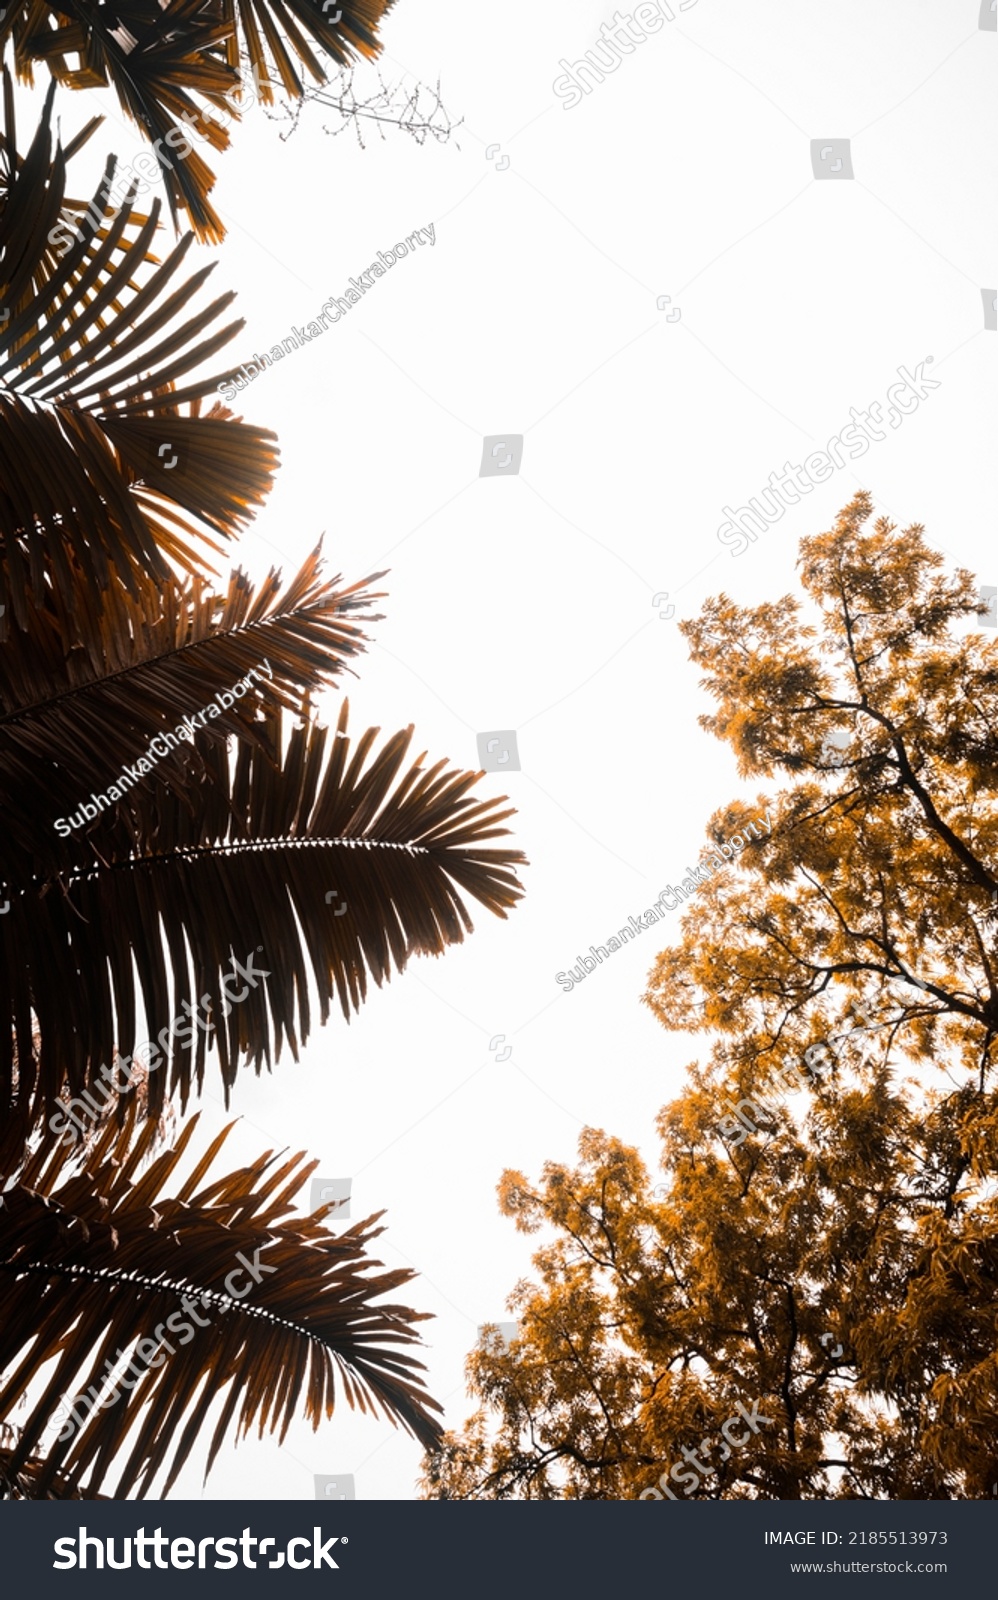 Vector frame in the form of the coconut tree and other branches of trees against the sky with white clouds. Nature leaves frame . #2185513973